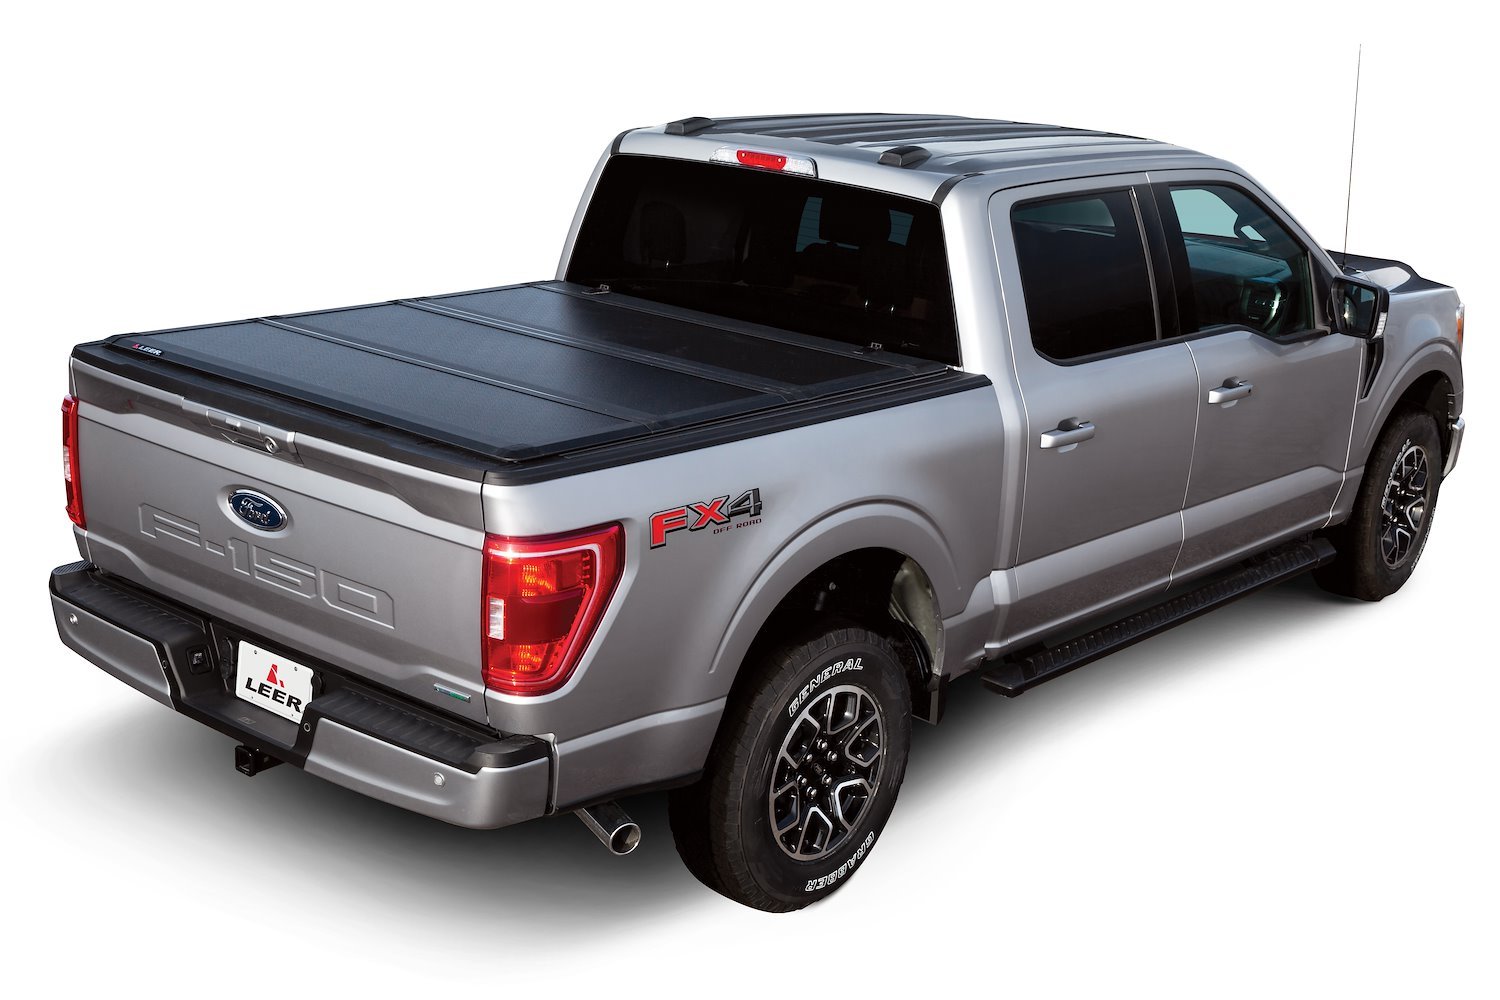 HF350M Hard Tri-Folding Tonneau Cover Fits Select Ford F-150 [Bed Length: 5 1/2 ft.]